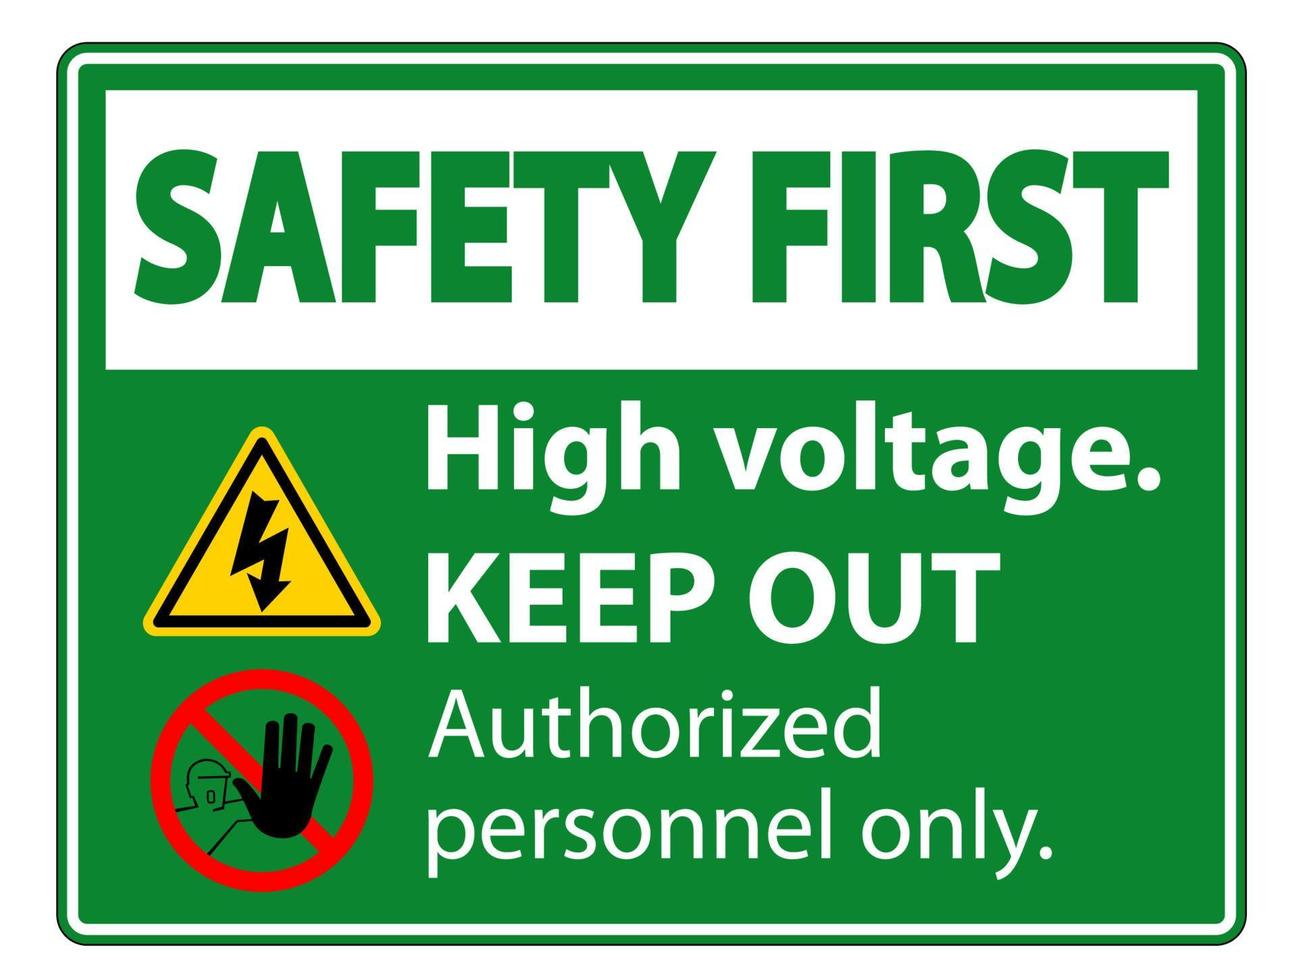 Safety first High Voltage Keep Out Sign Isolate On White Background,Vector Illustration EPS.10 vector